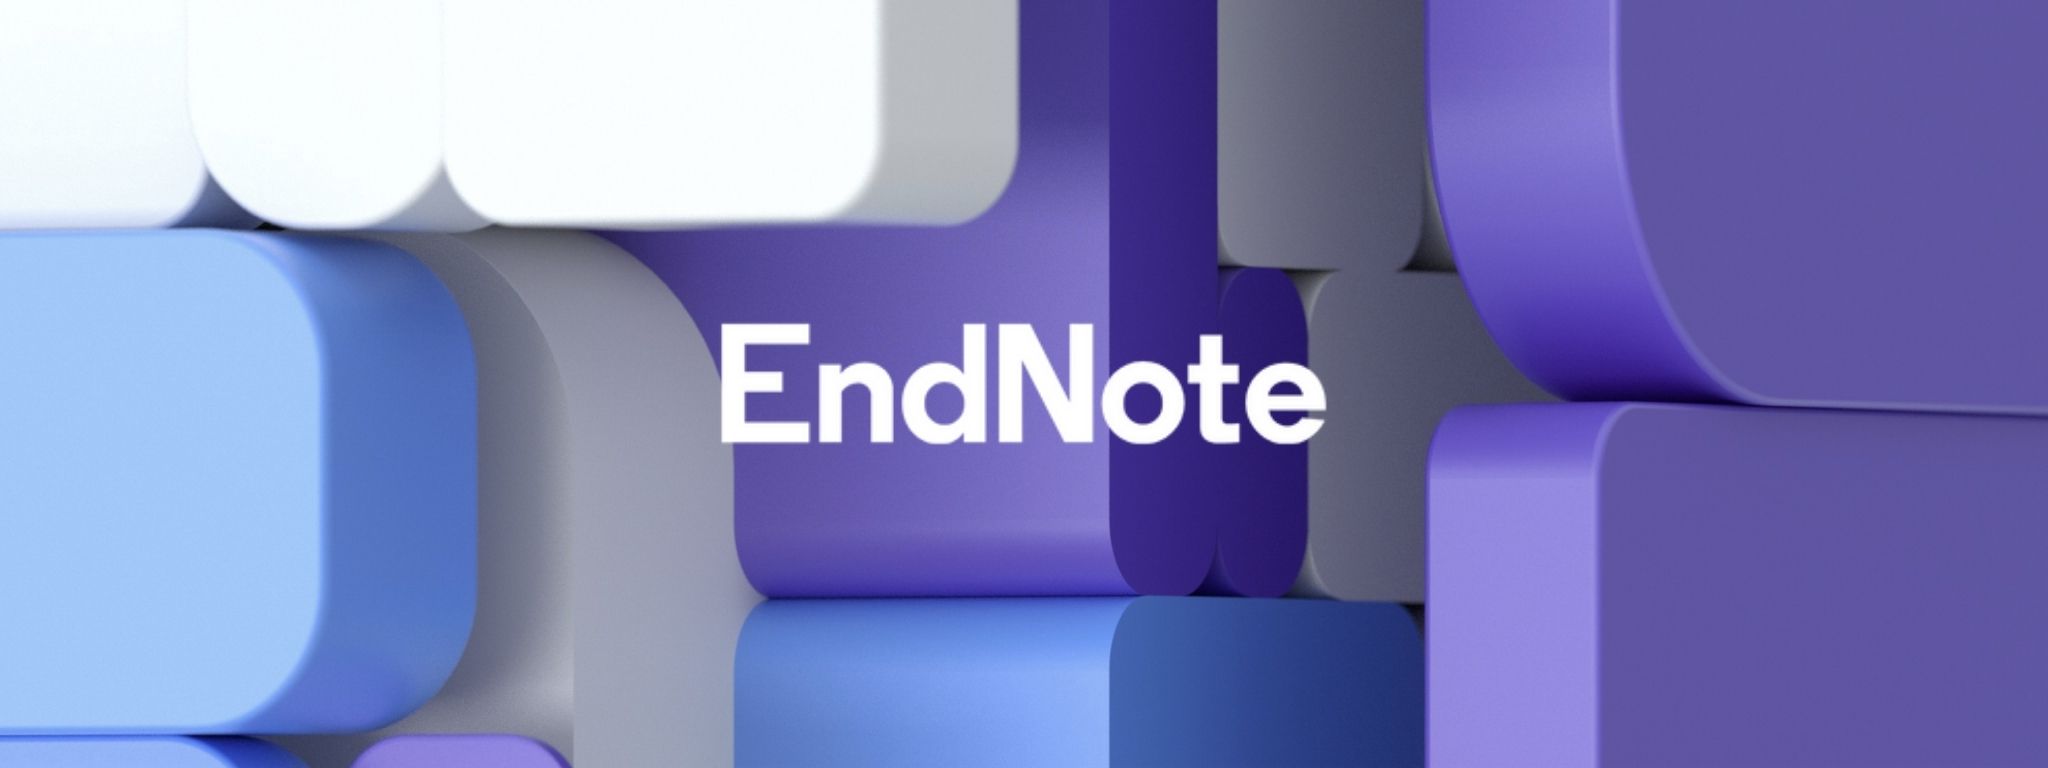 endnote download free for windows 10